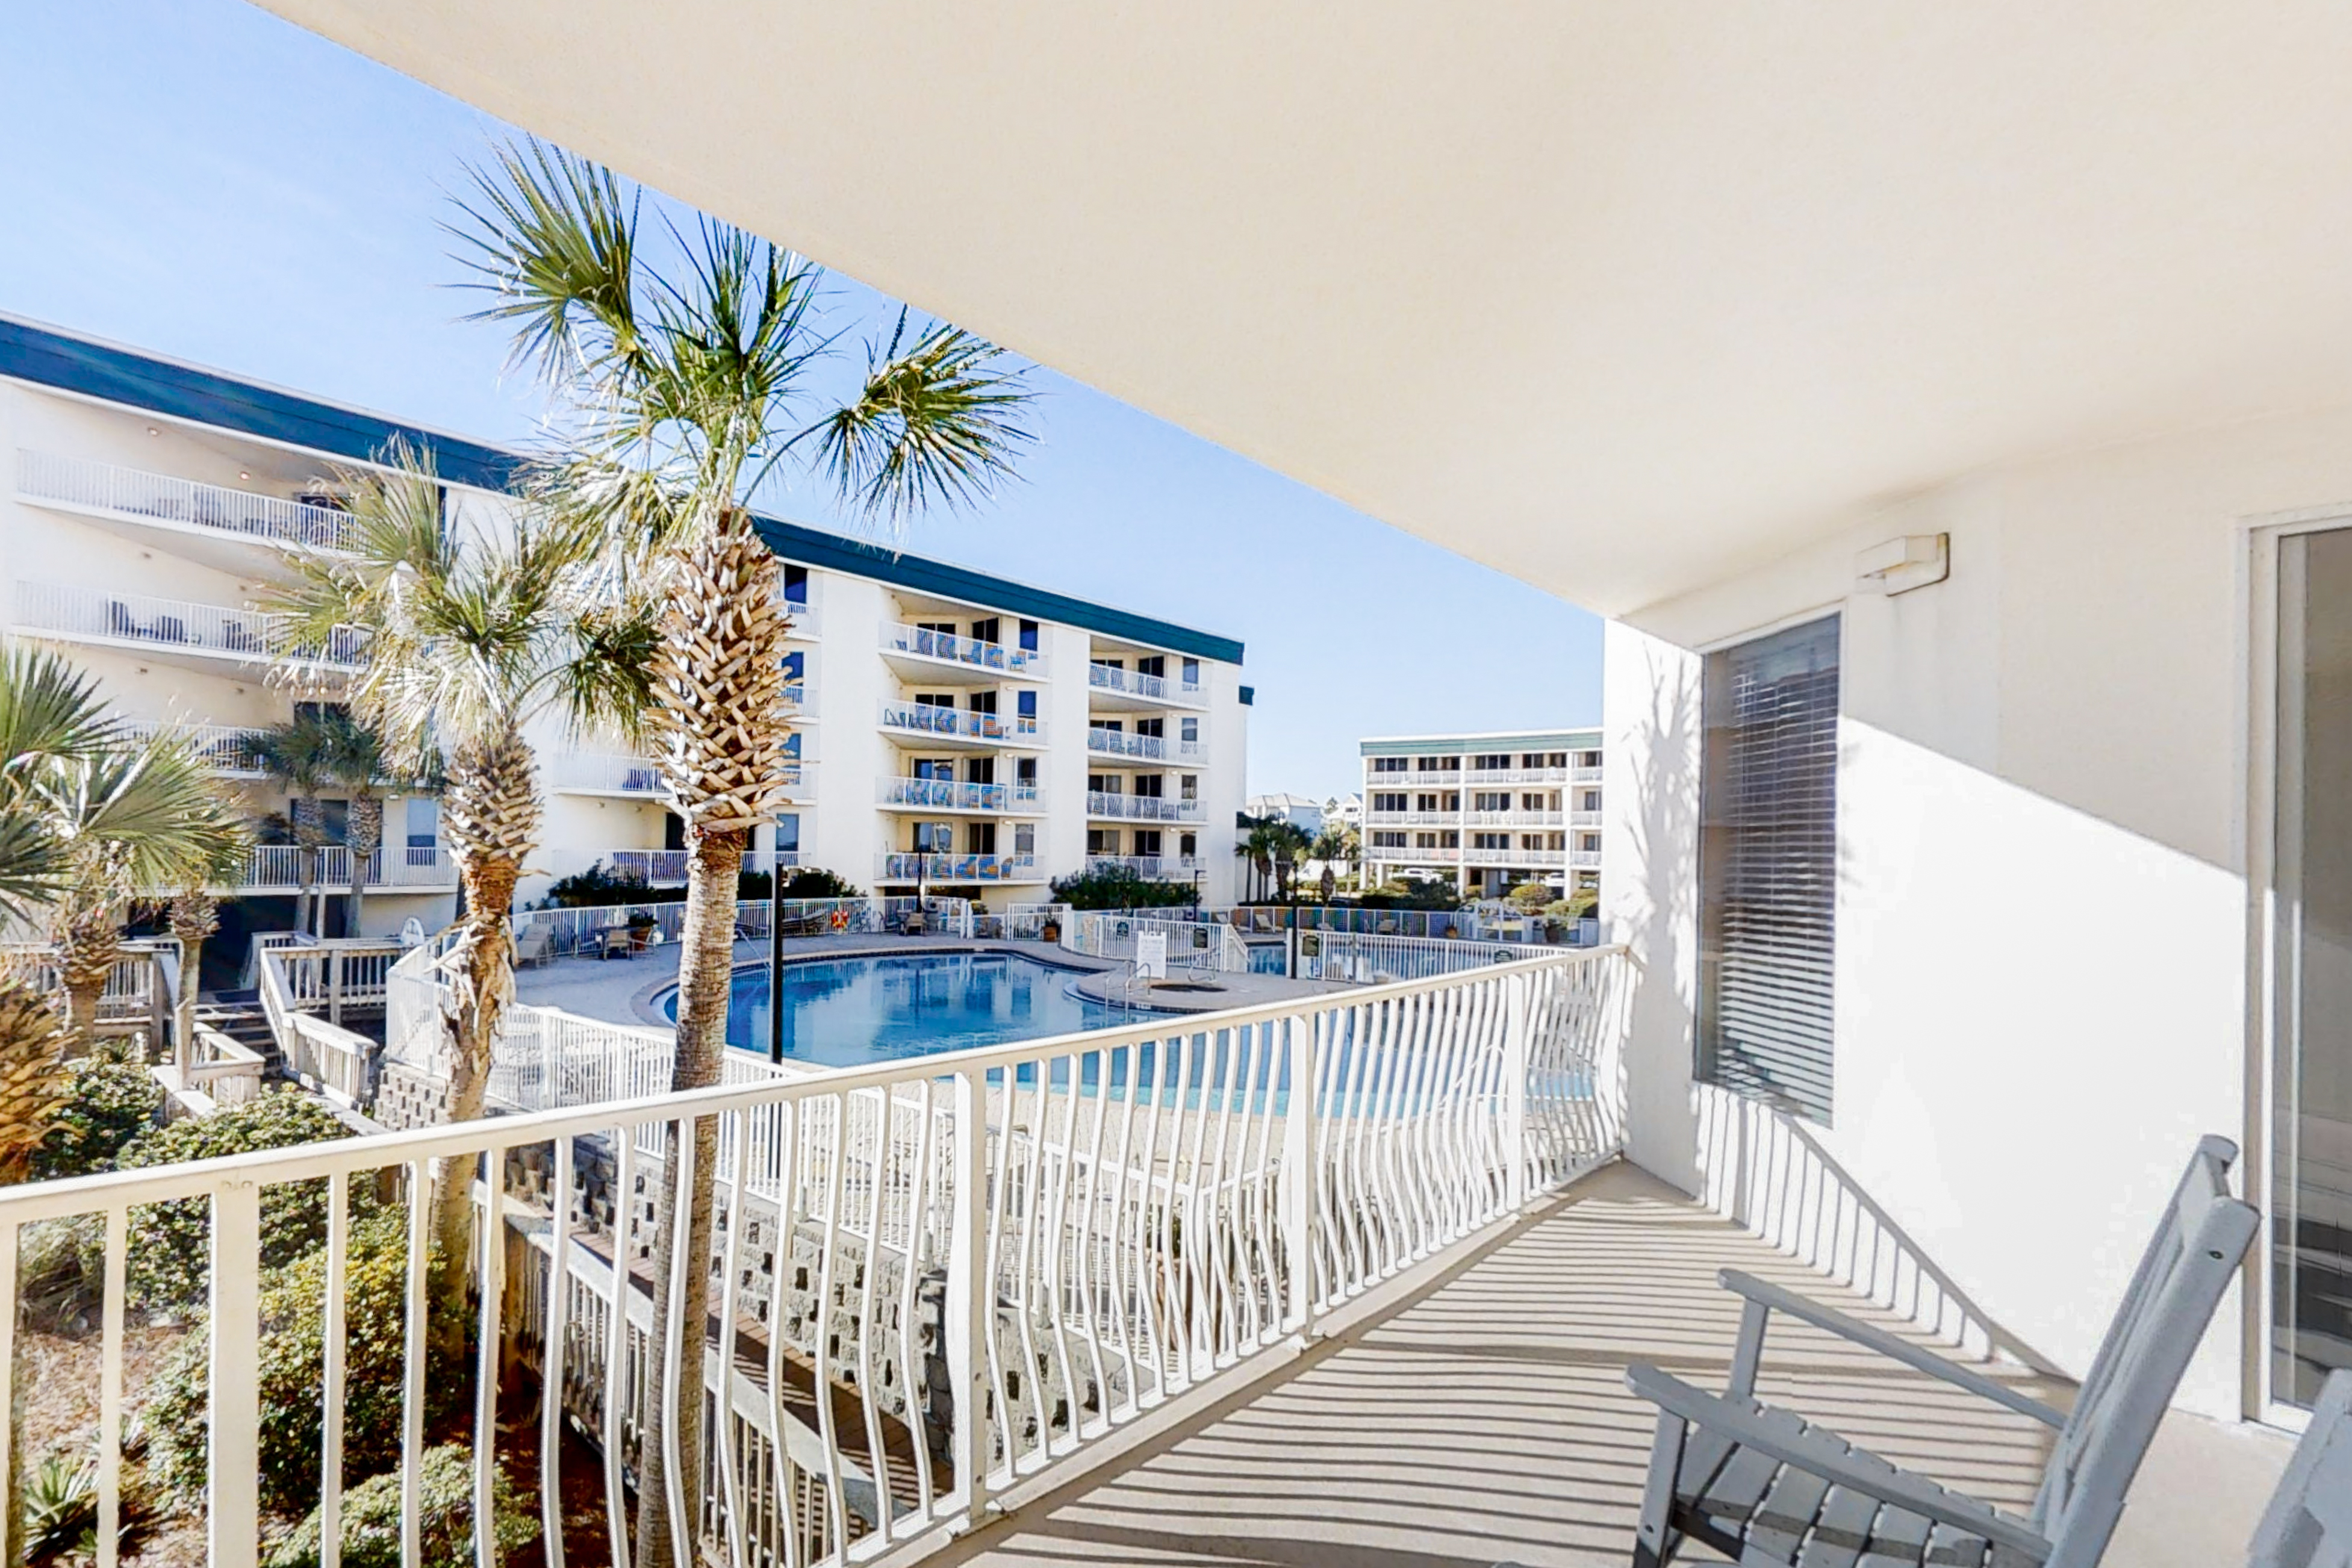 Dunes of Seagrove A108 Condo rental in Dunes of Seagrove in Highway 30-A Florida - #17